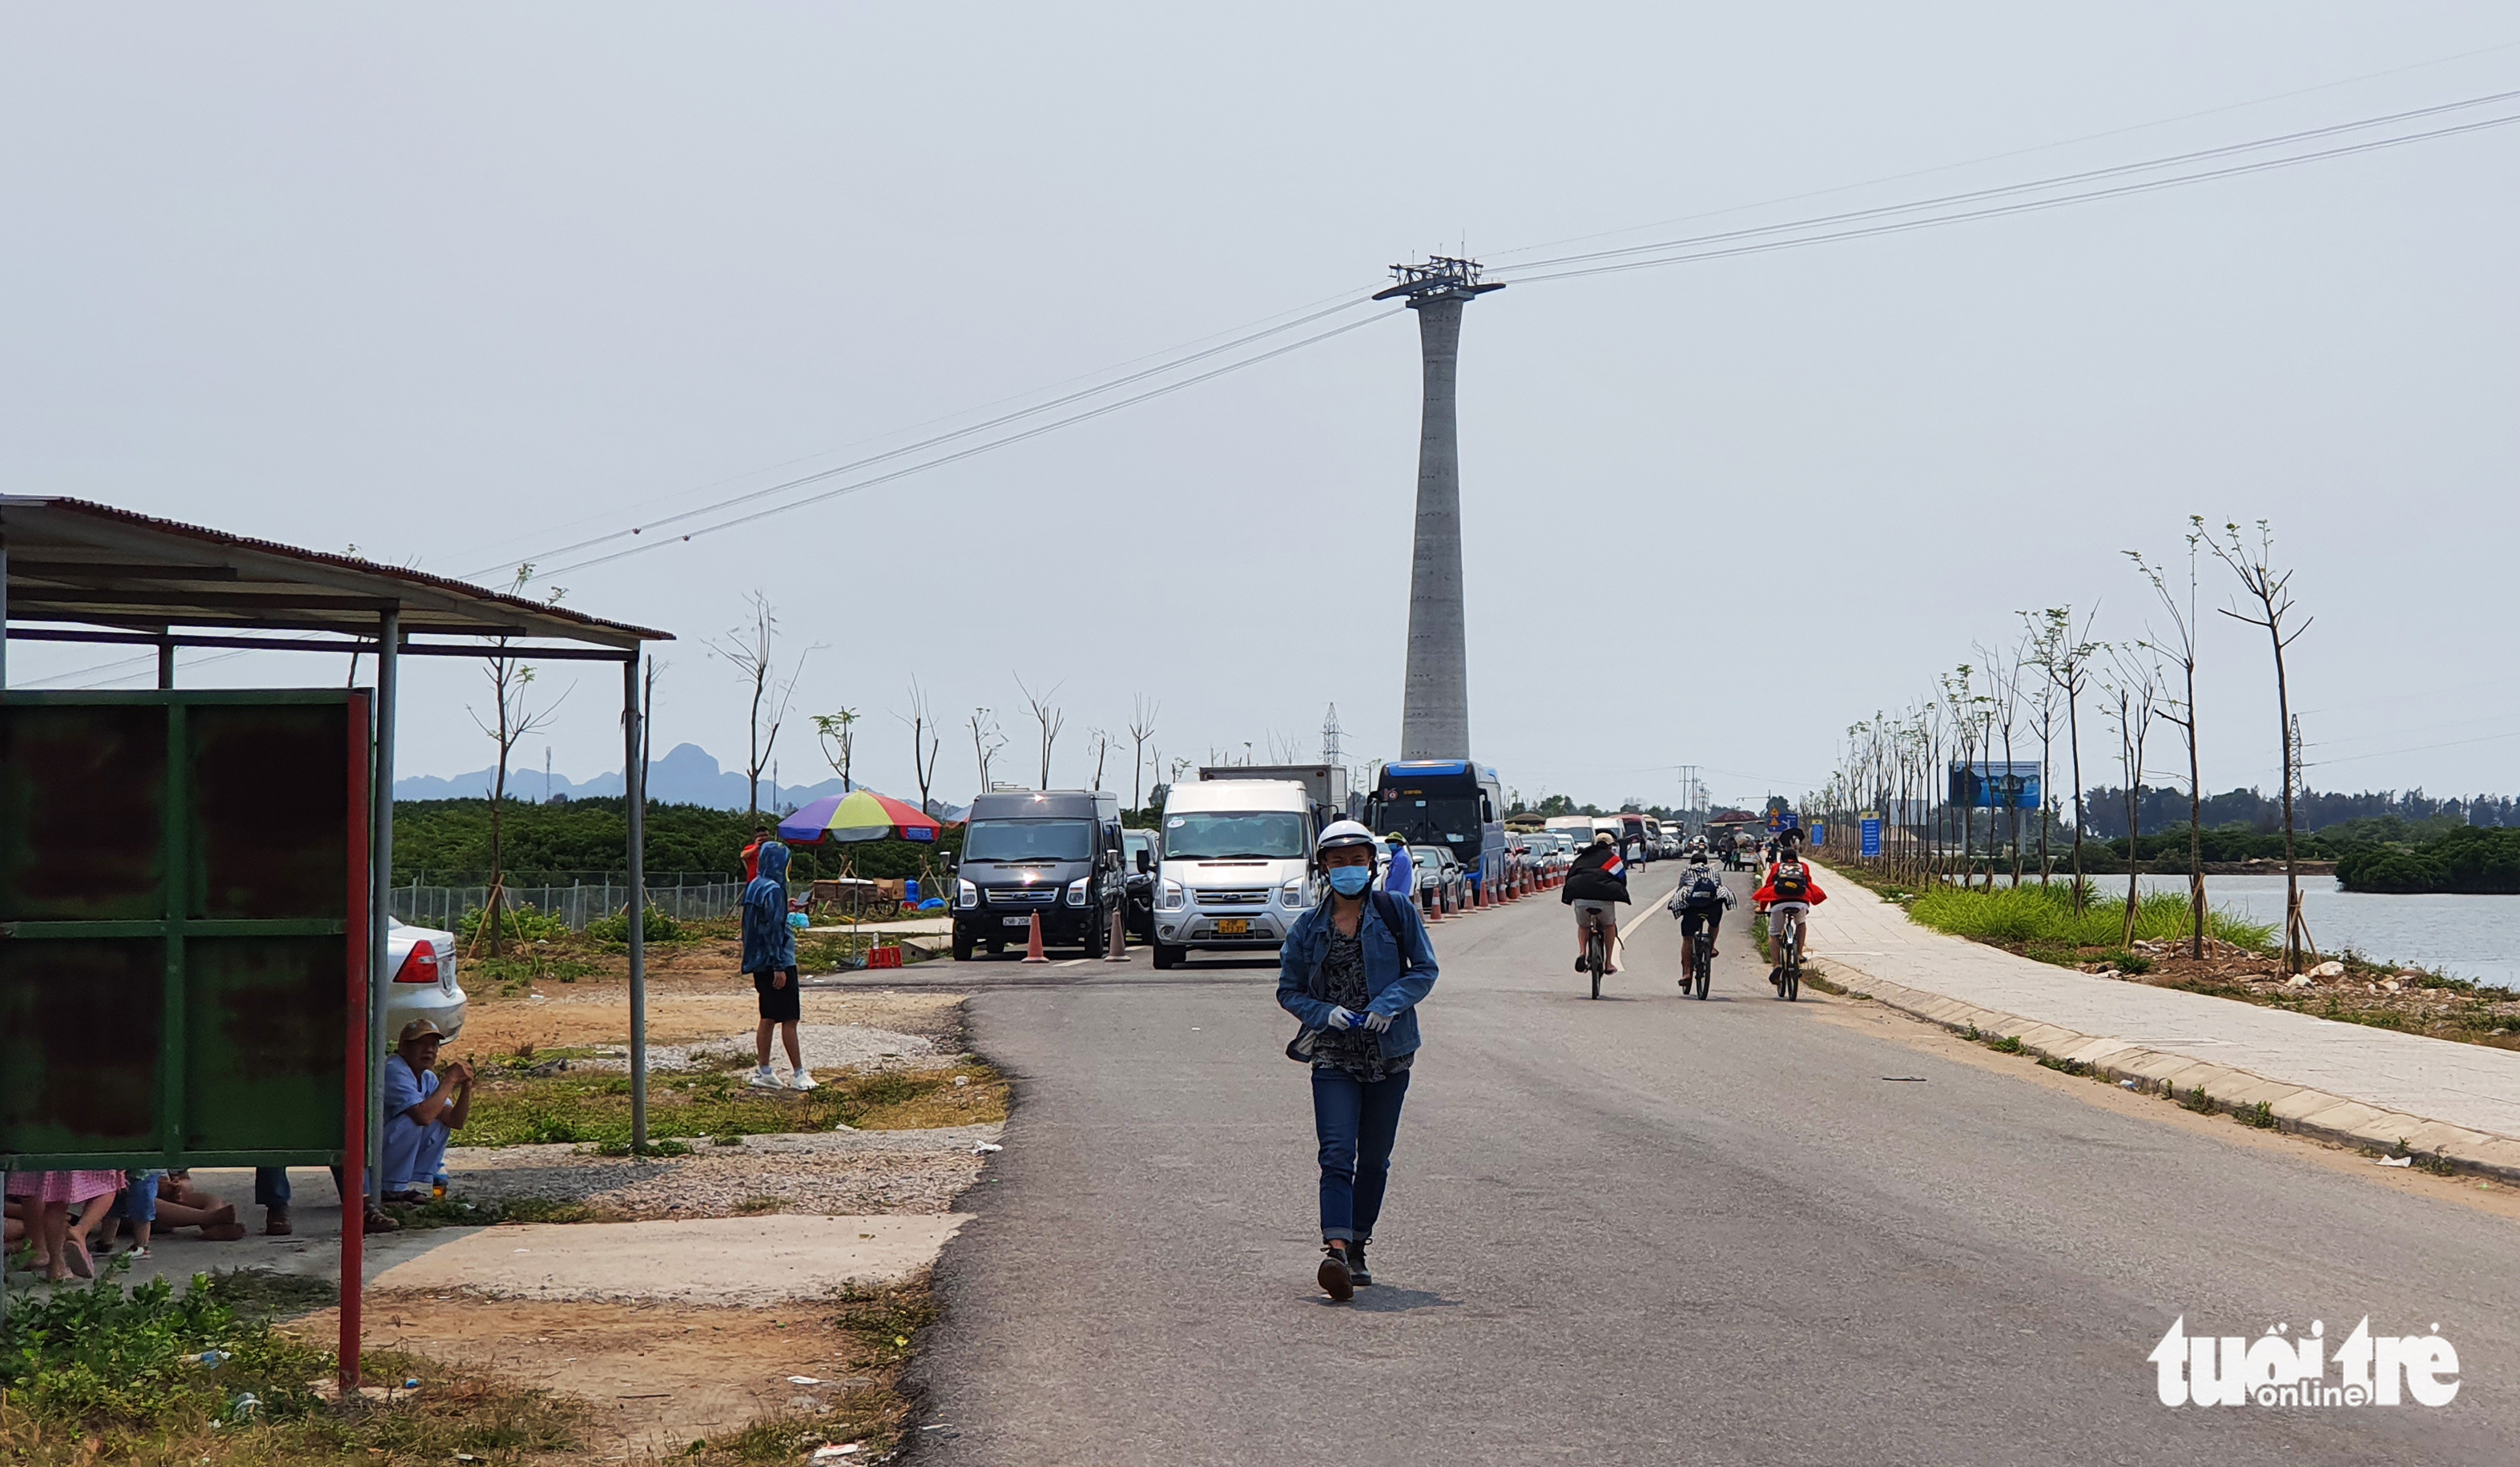 Vehicles line up on the major road leading to the Cai Vieng ferry terminal in Cat Ba Island off Hai Phong City, Vietnam, May 2, 2022. Photo: Tien Thang / Tuoi Tre